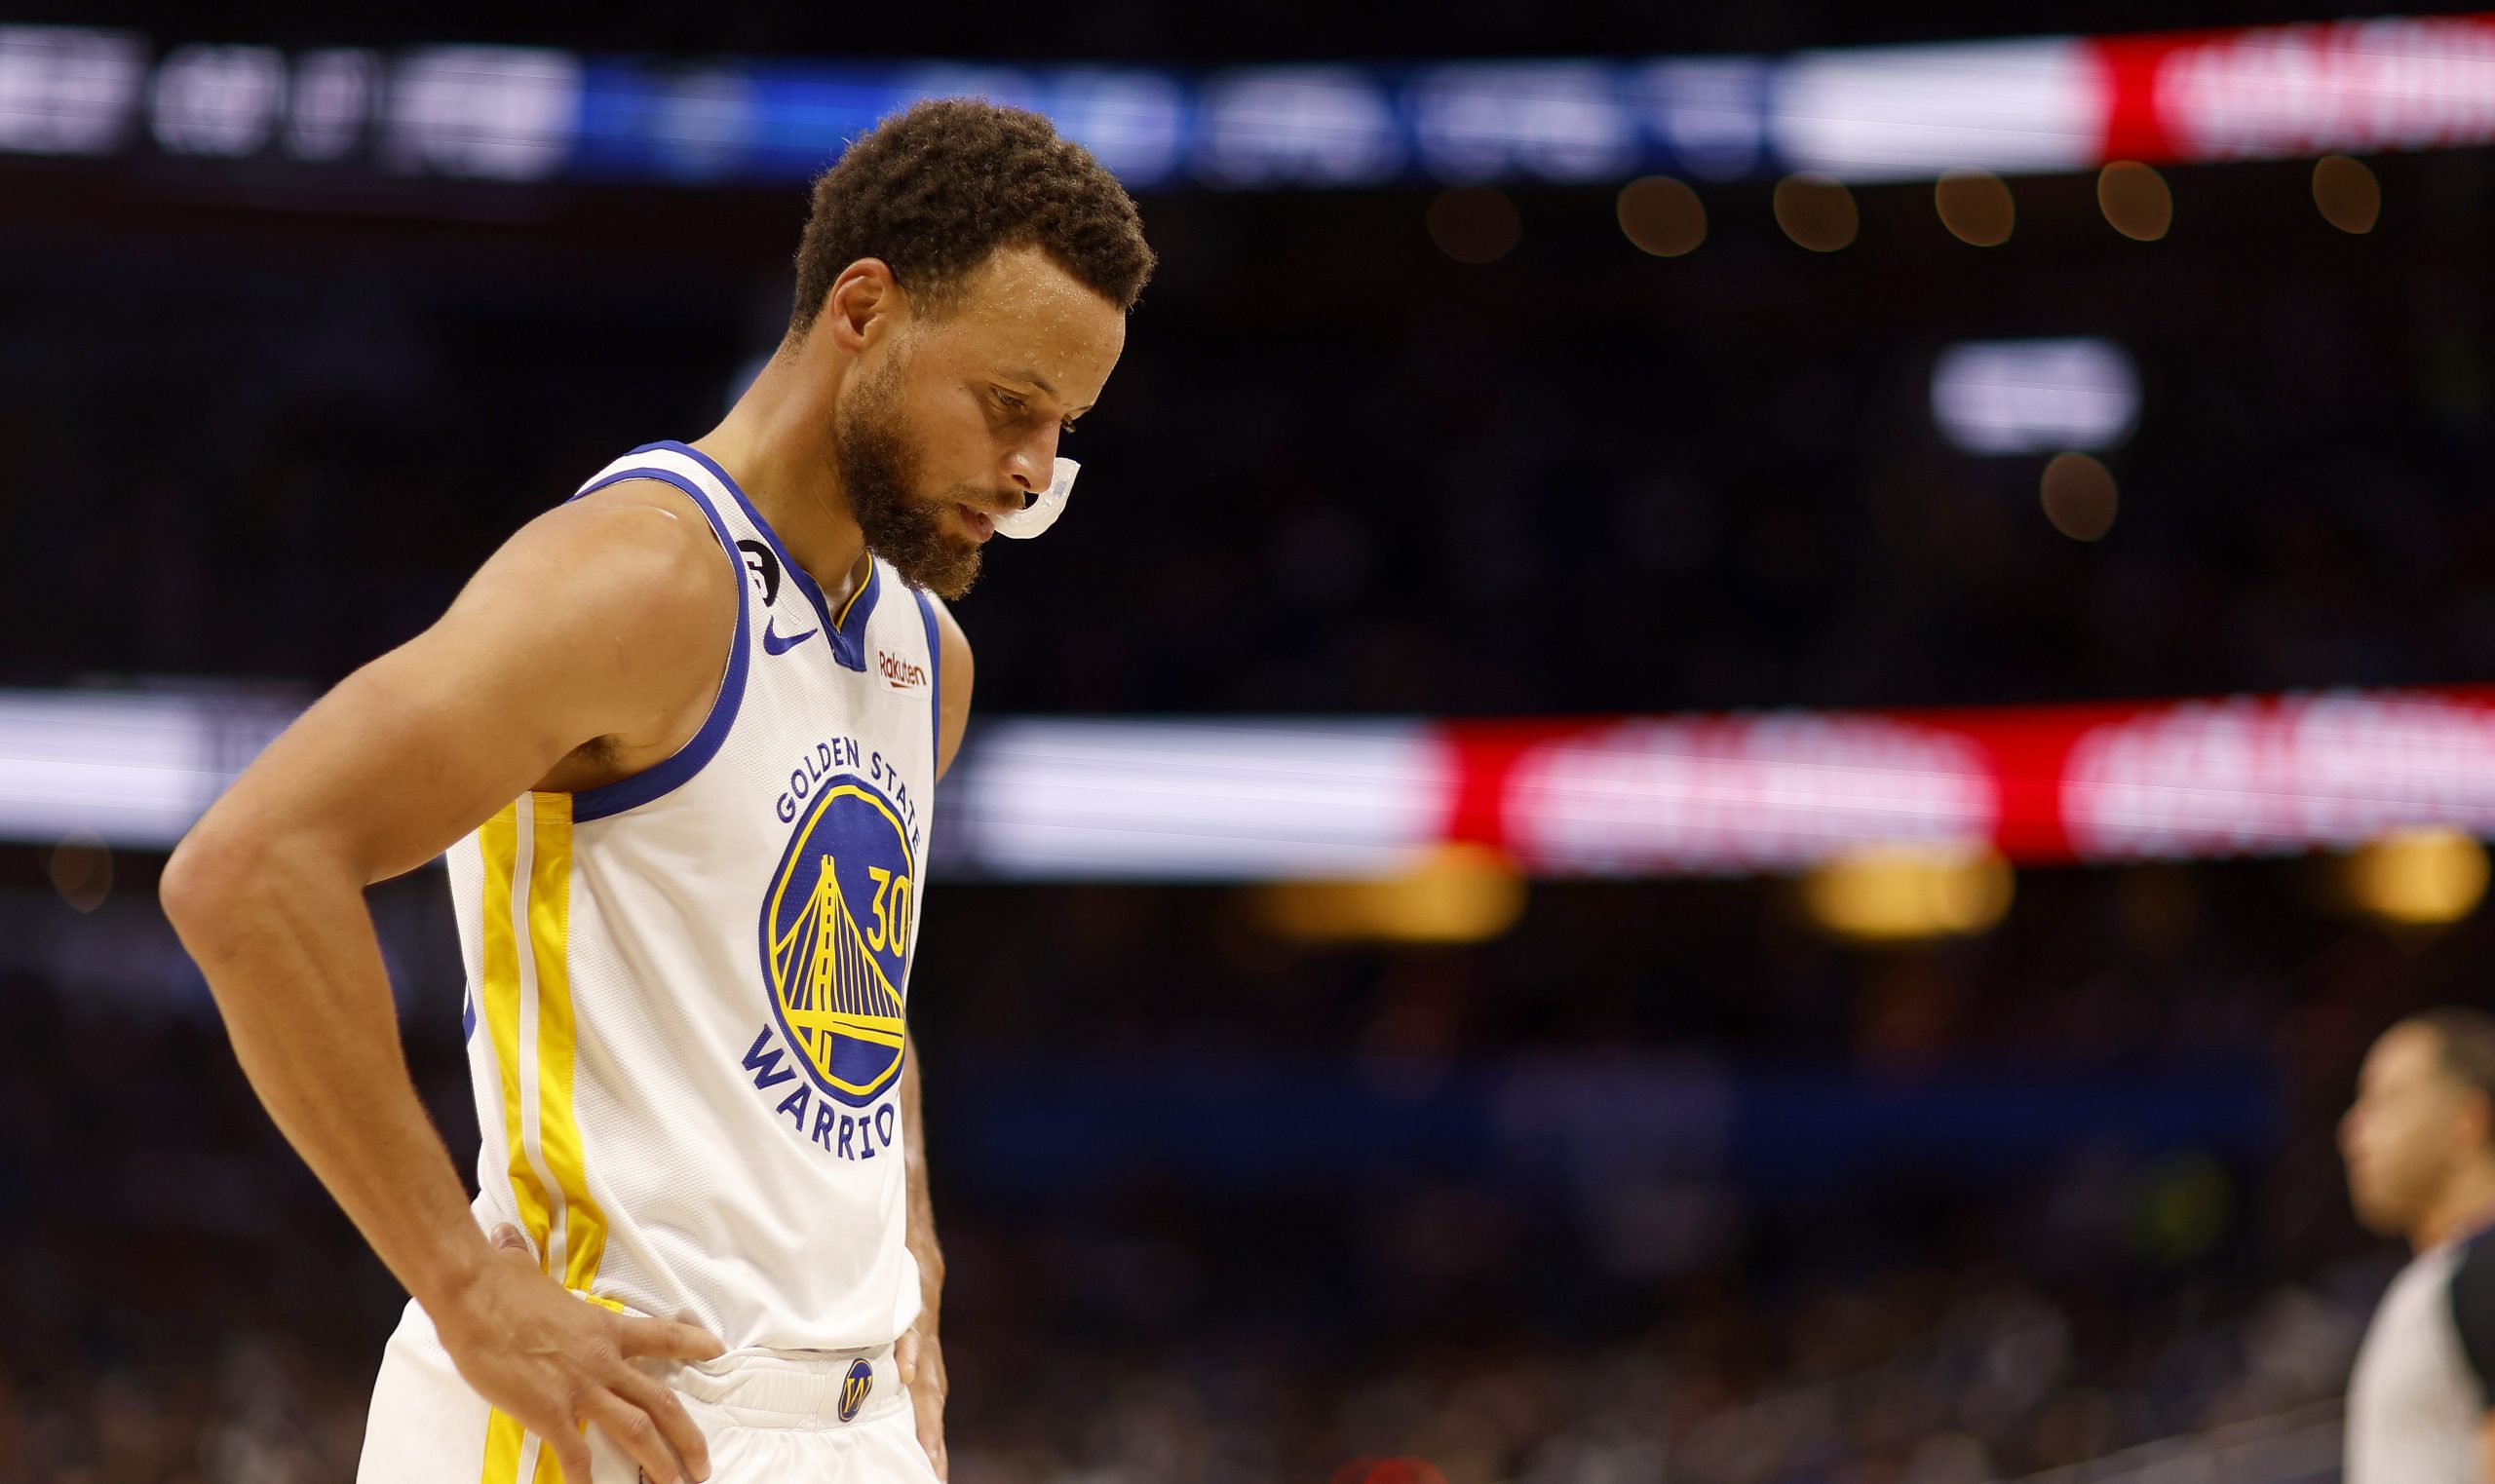 Stephen Curry #30 of the Golden State Warriors looks on during a game against the Golden State Warr...